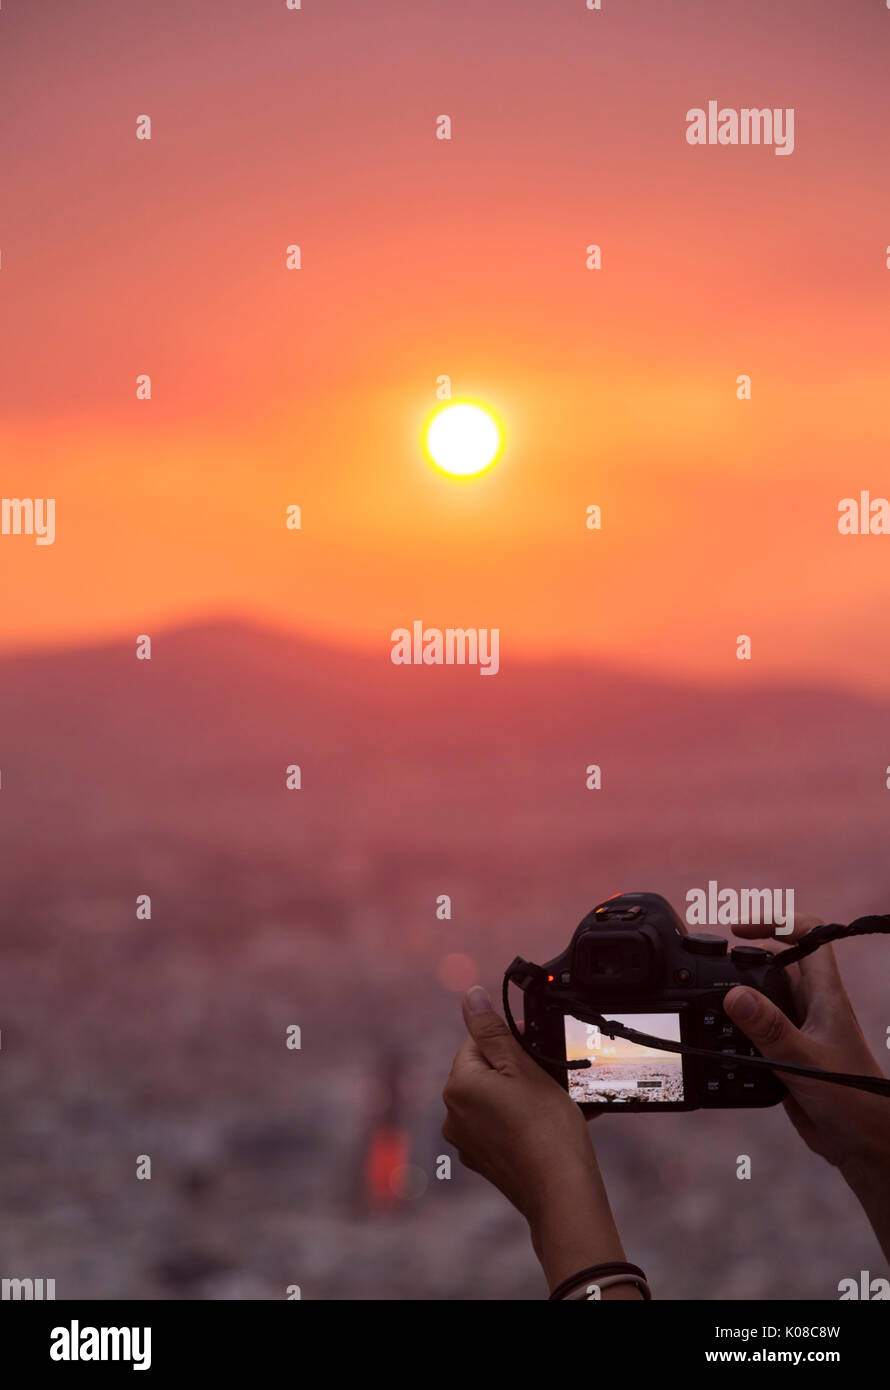 Taking pictures of the sunset, in Athens, Greece. Stock Photo